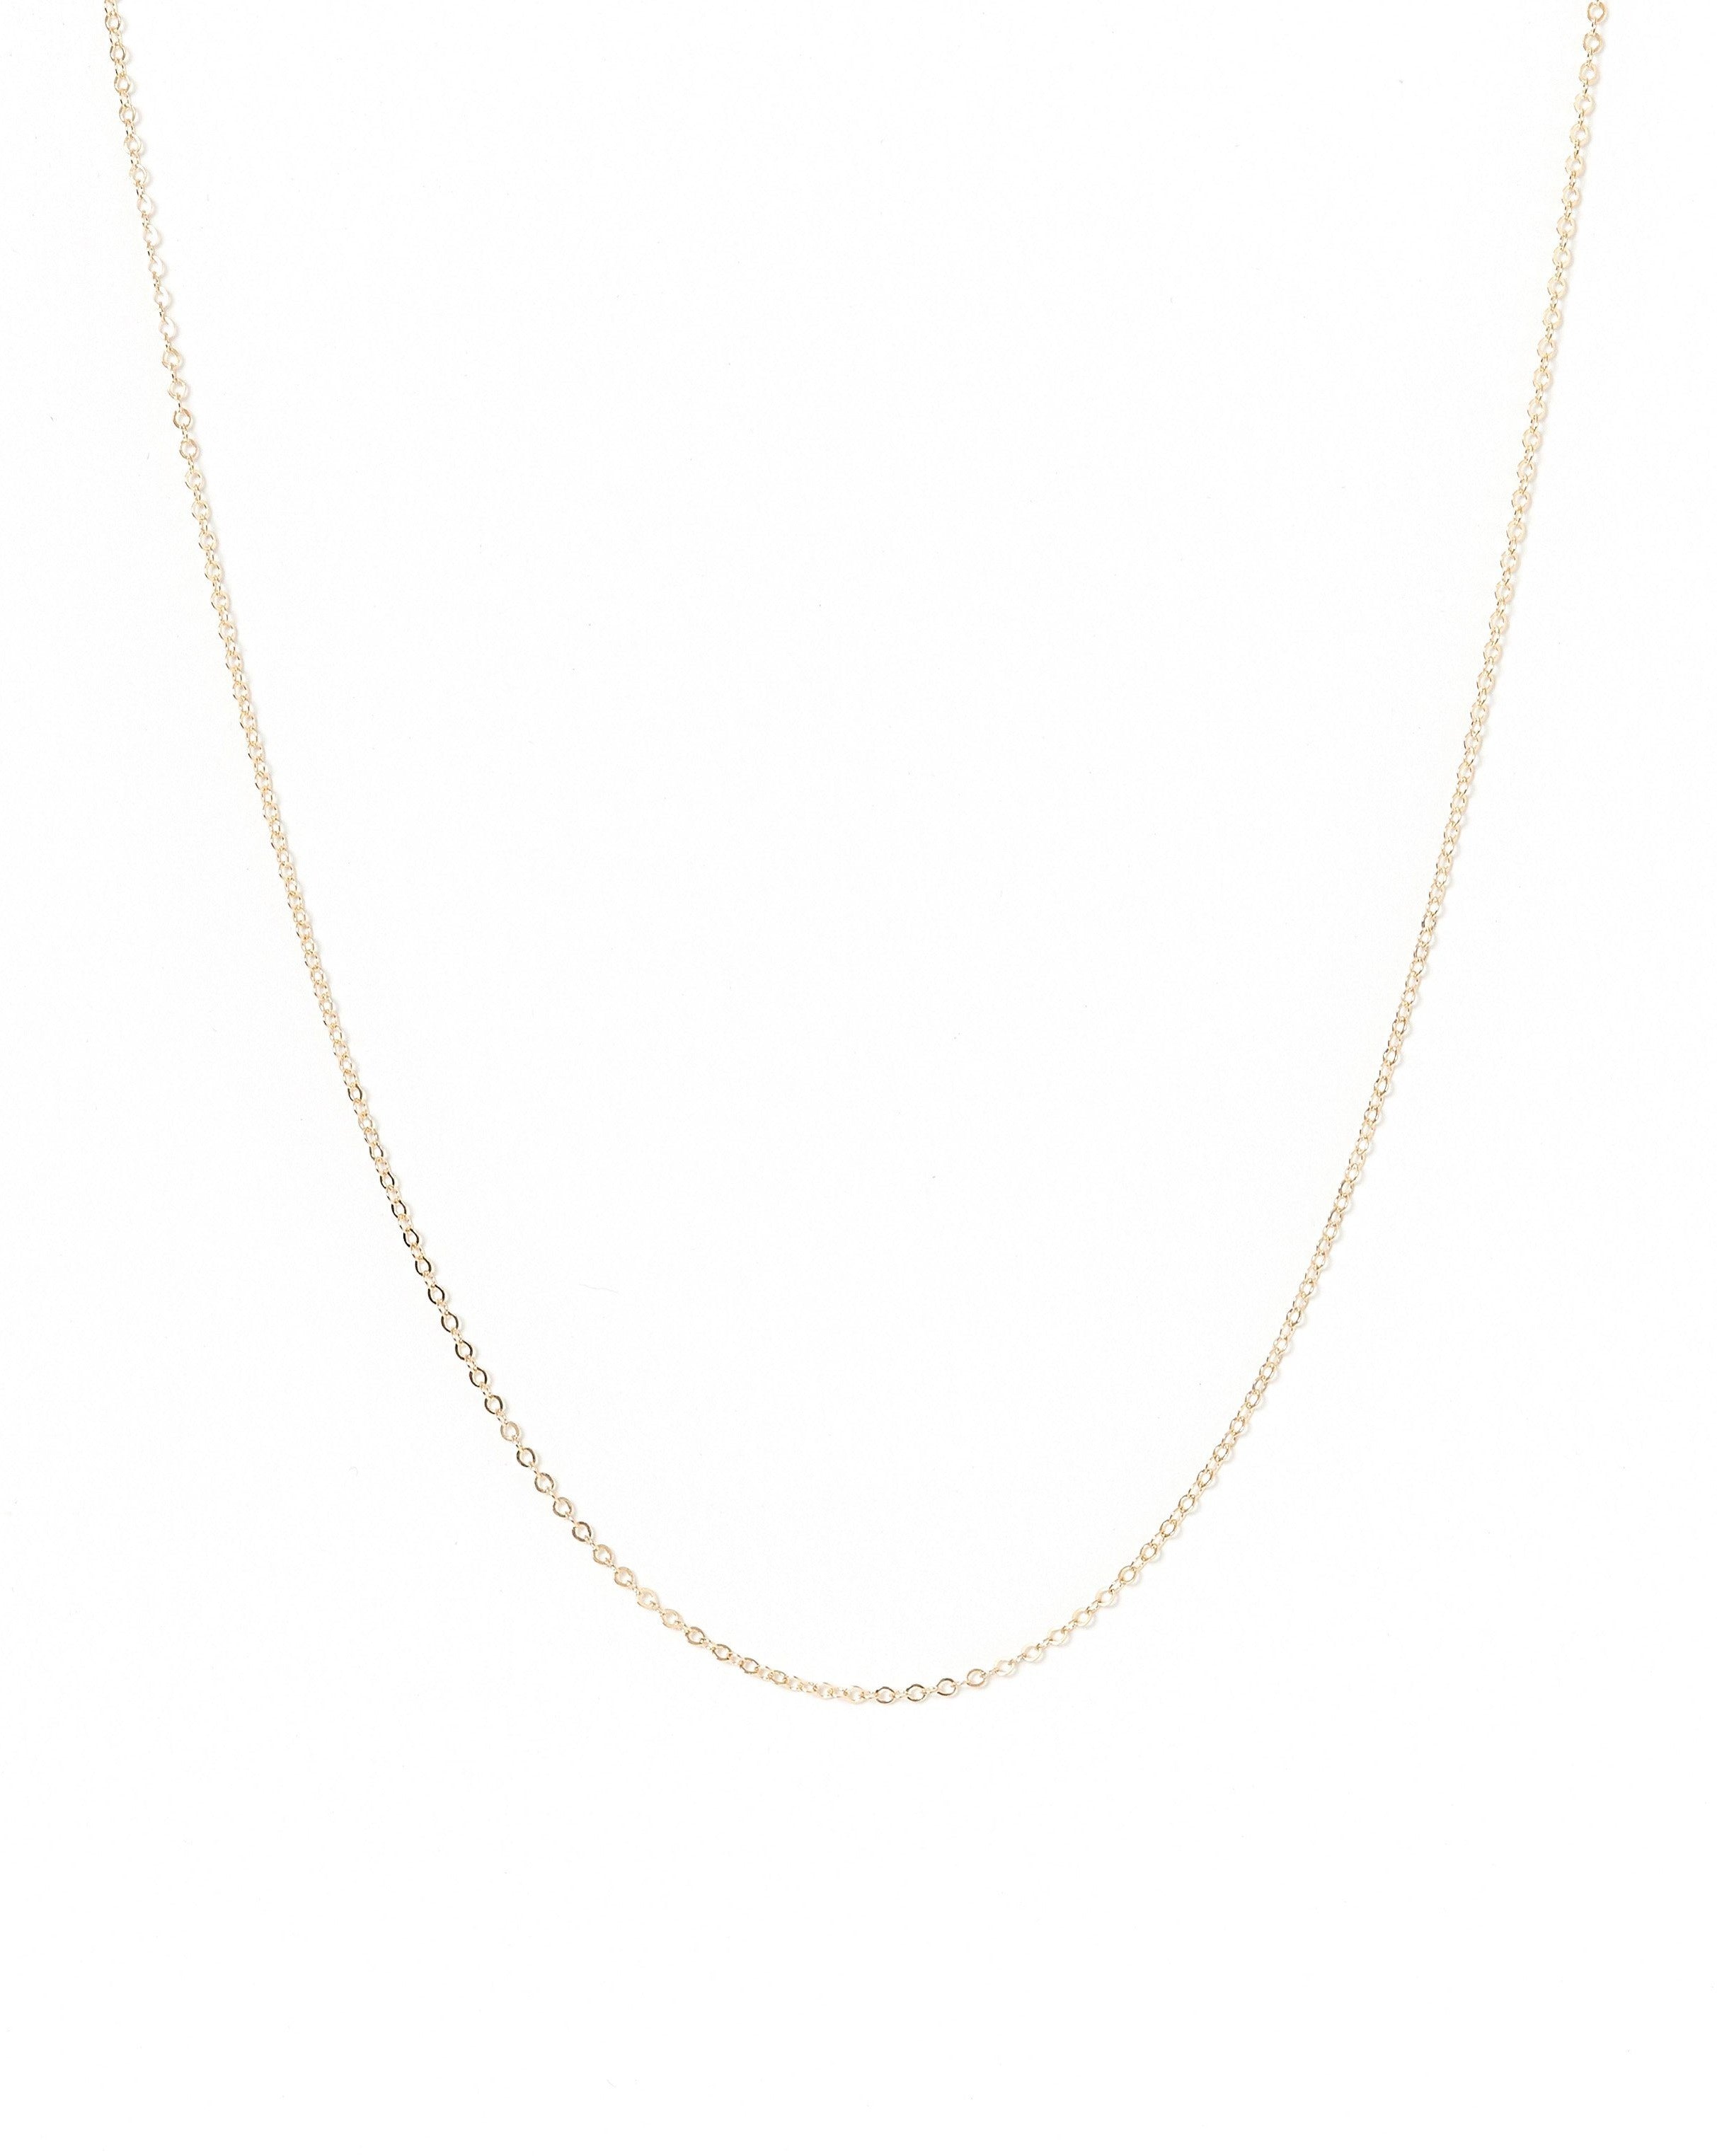 Minimalist Chain Necklace by KOZAKH. A handcrafted minimalist chain necklace in 14K Gold Filled, available in 4 adjustable lengths.